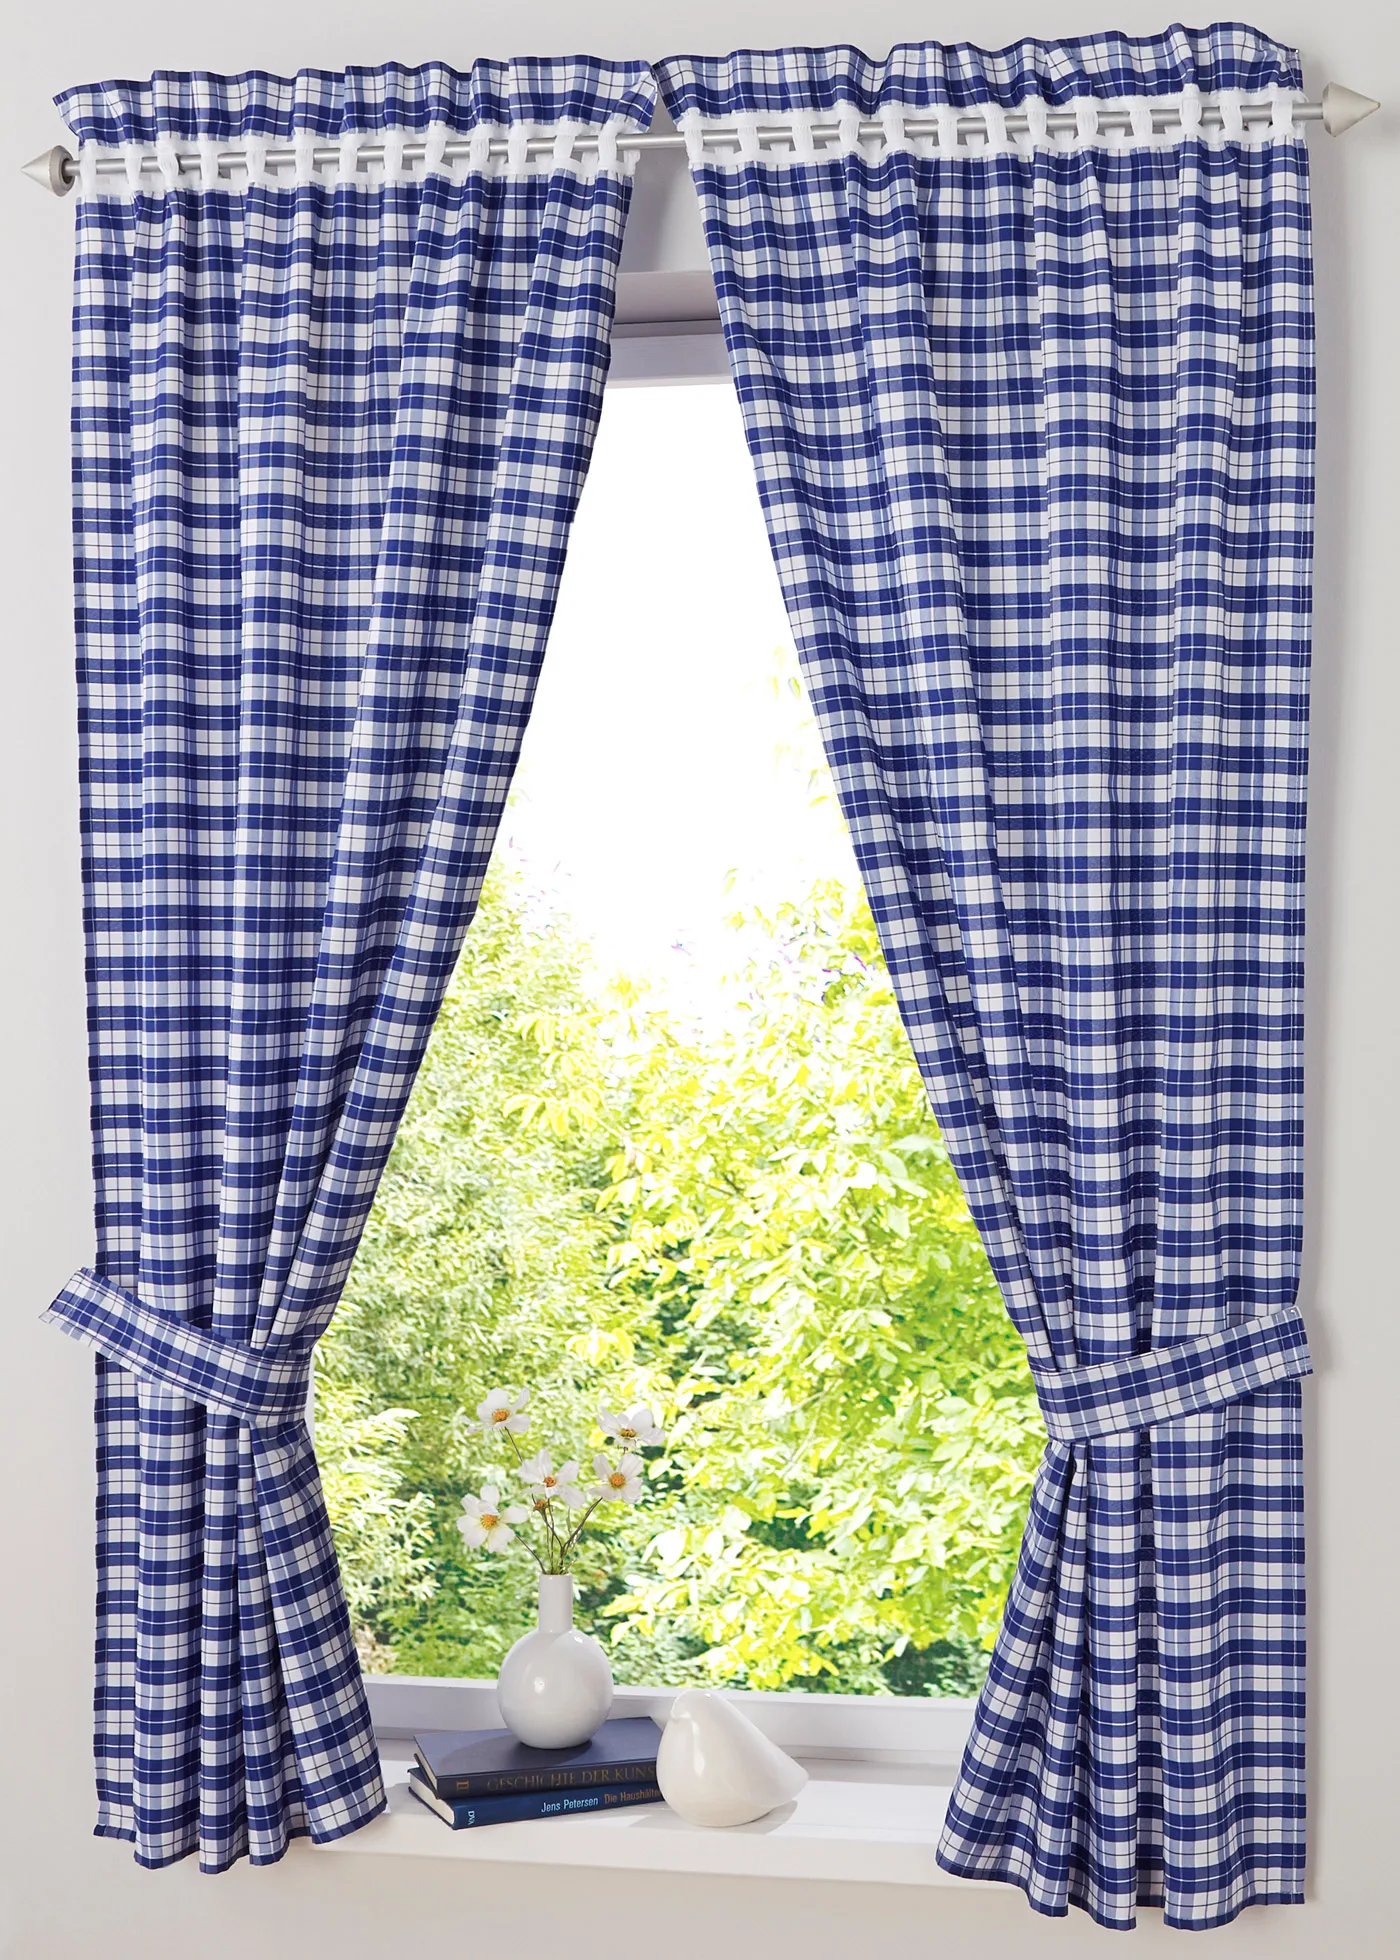 Pastoral Red/ Blue Plaid Short Curtains for Kitchen Window Treatments Kids Room Curtains for Bedroom Living Room Roman Blinds